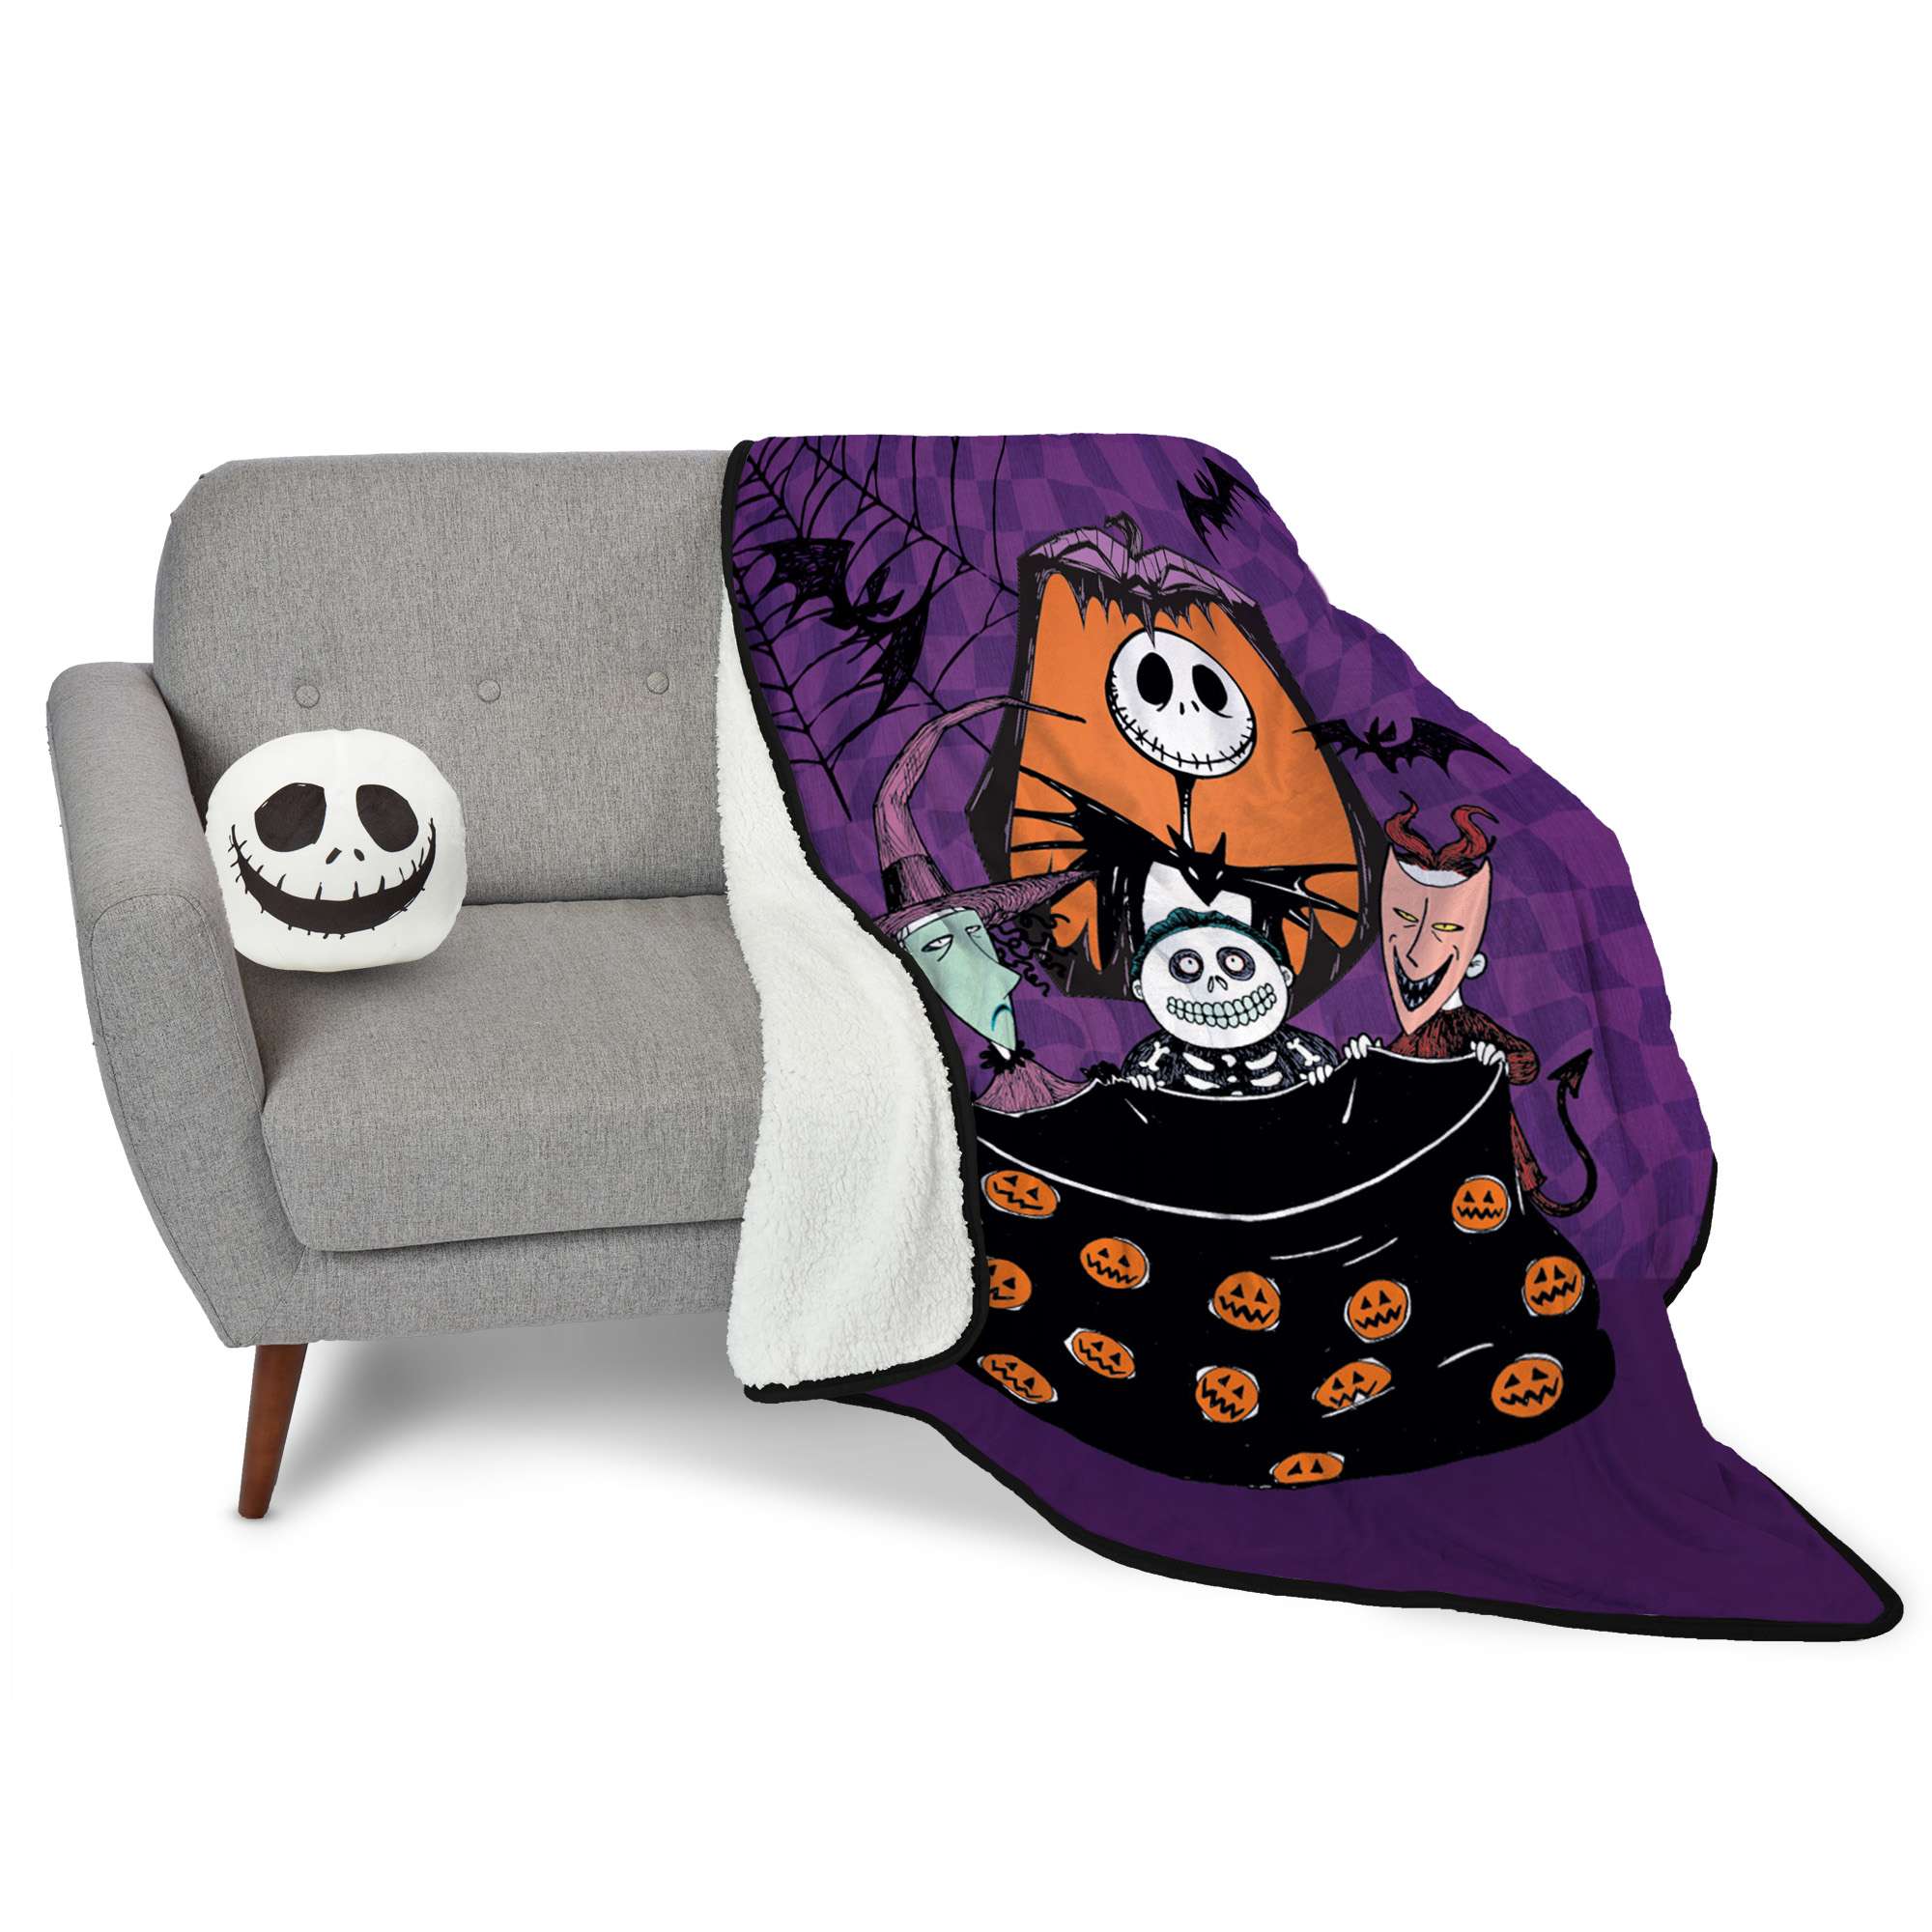 The Nightmare Before Christmas Kooky Treats Character Cloud Pillow & Silk Touch Sherpa Throw Set